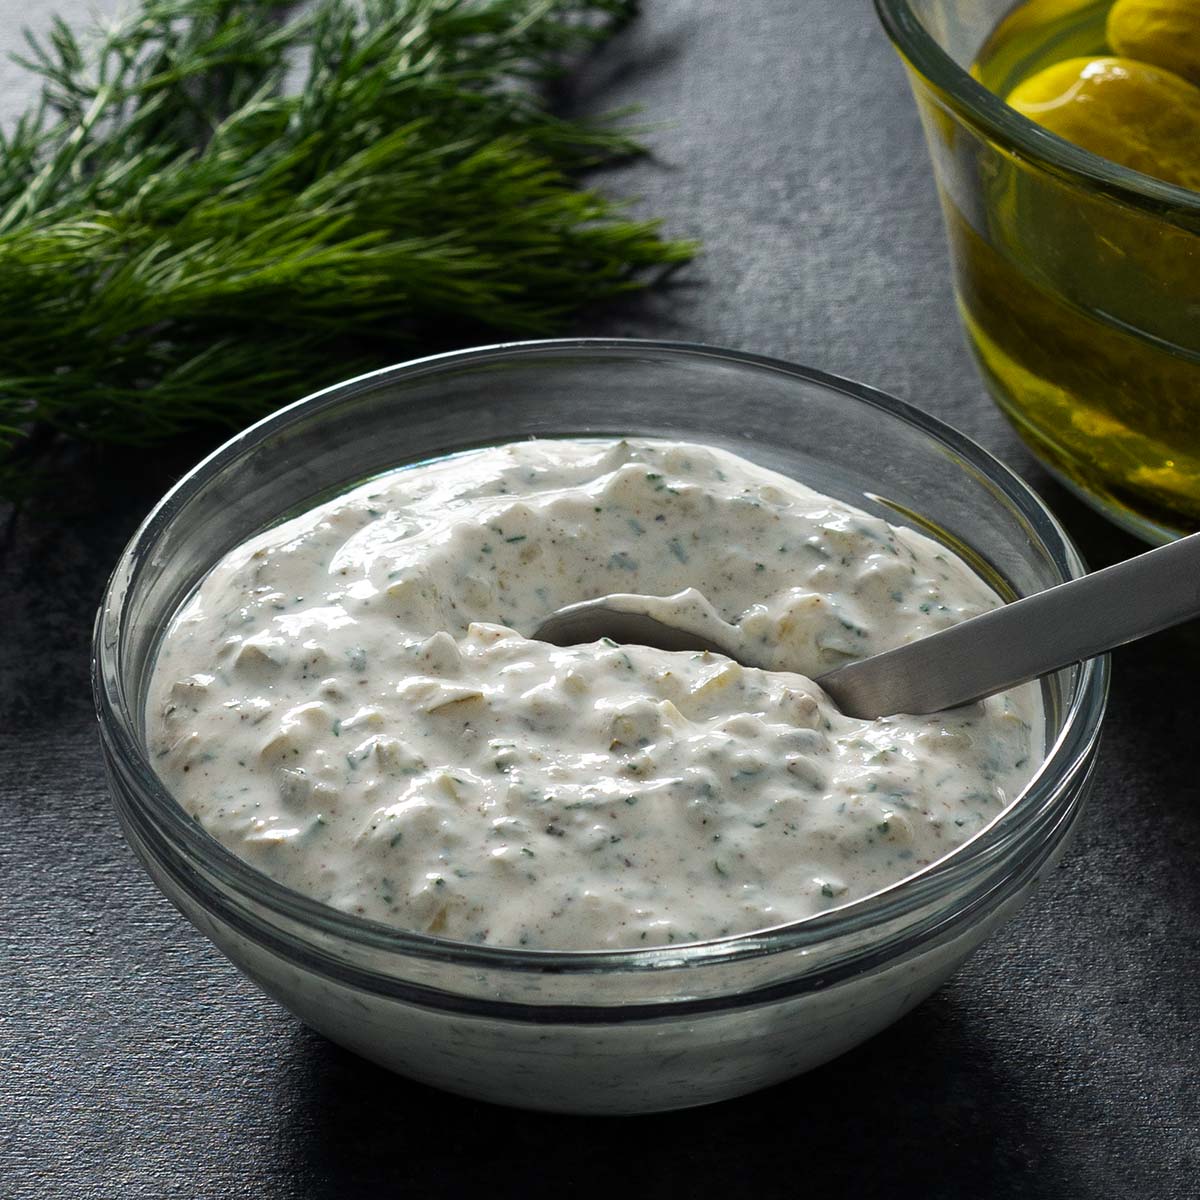 Sour cream tartar sauce in a glass bowl with a small spoon.